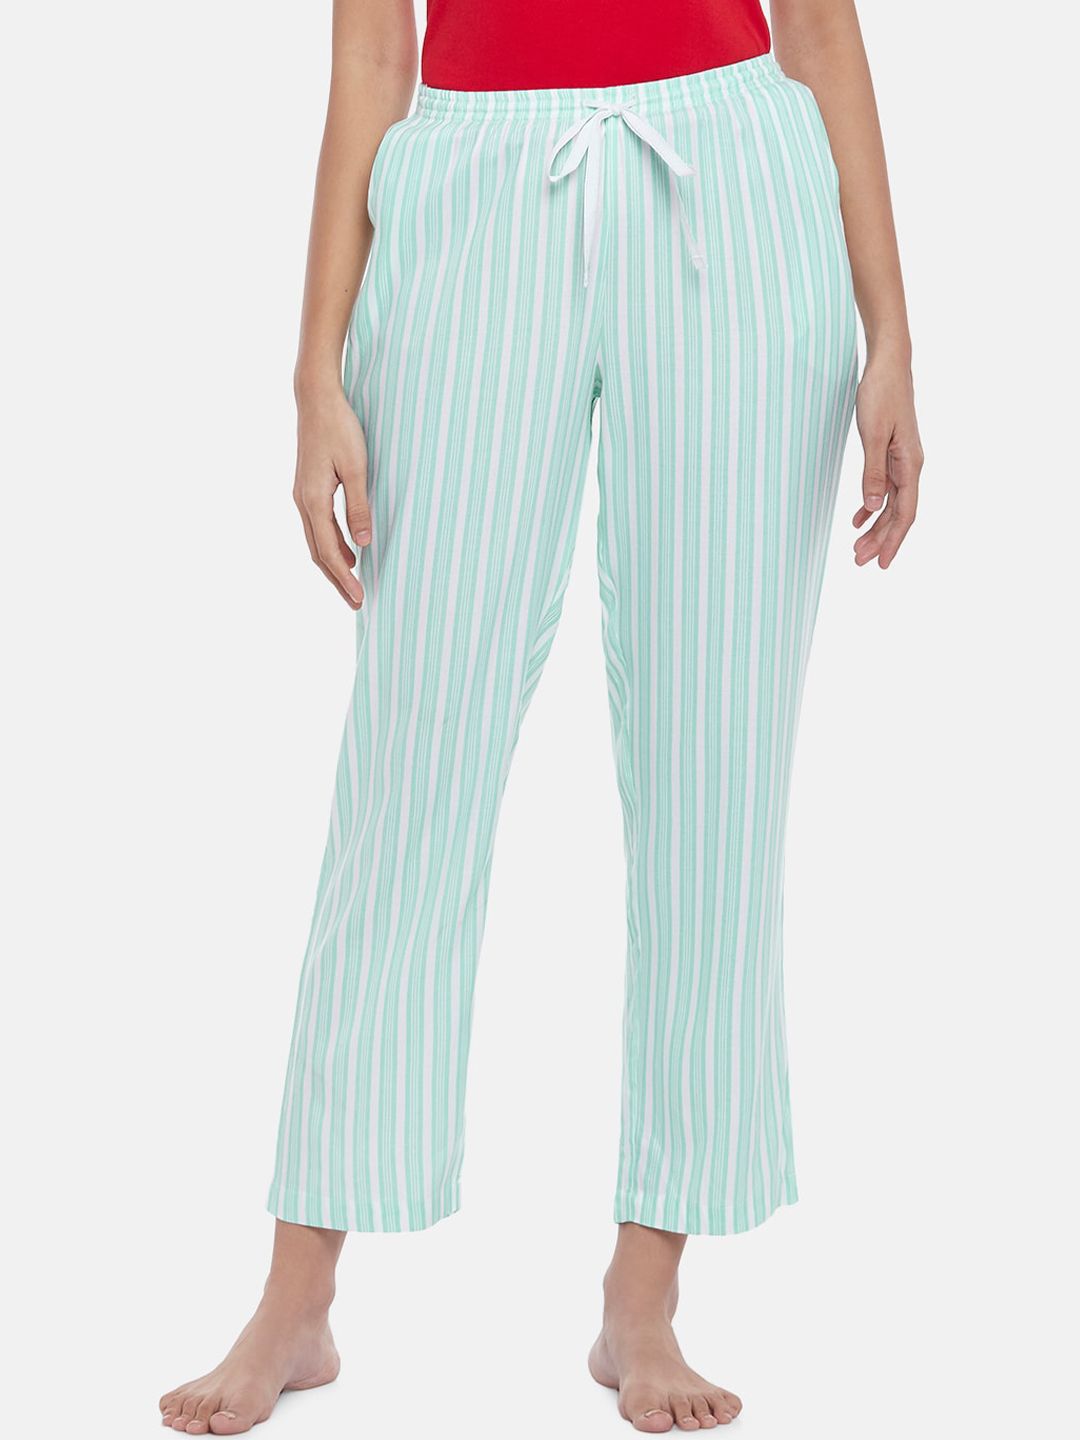 Dreamz by Pantaloons Women White Striped Lounge Pants Price in India